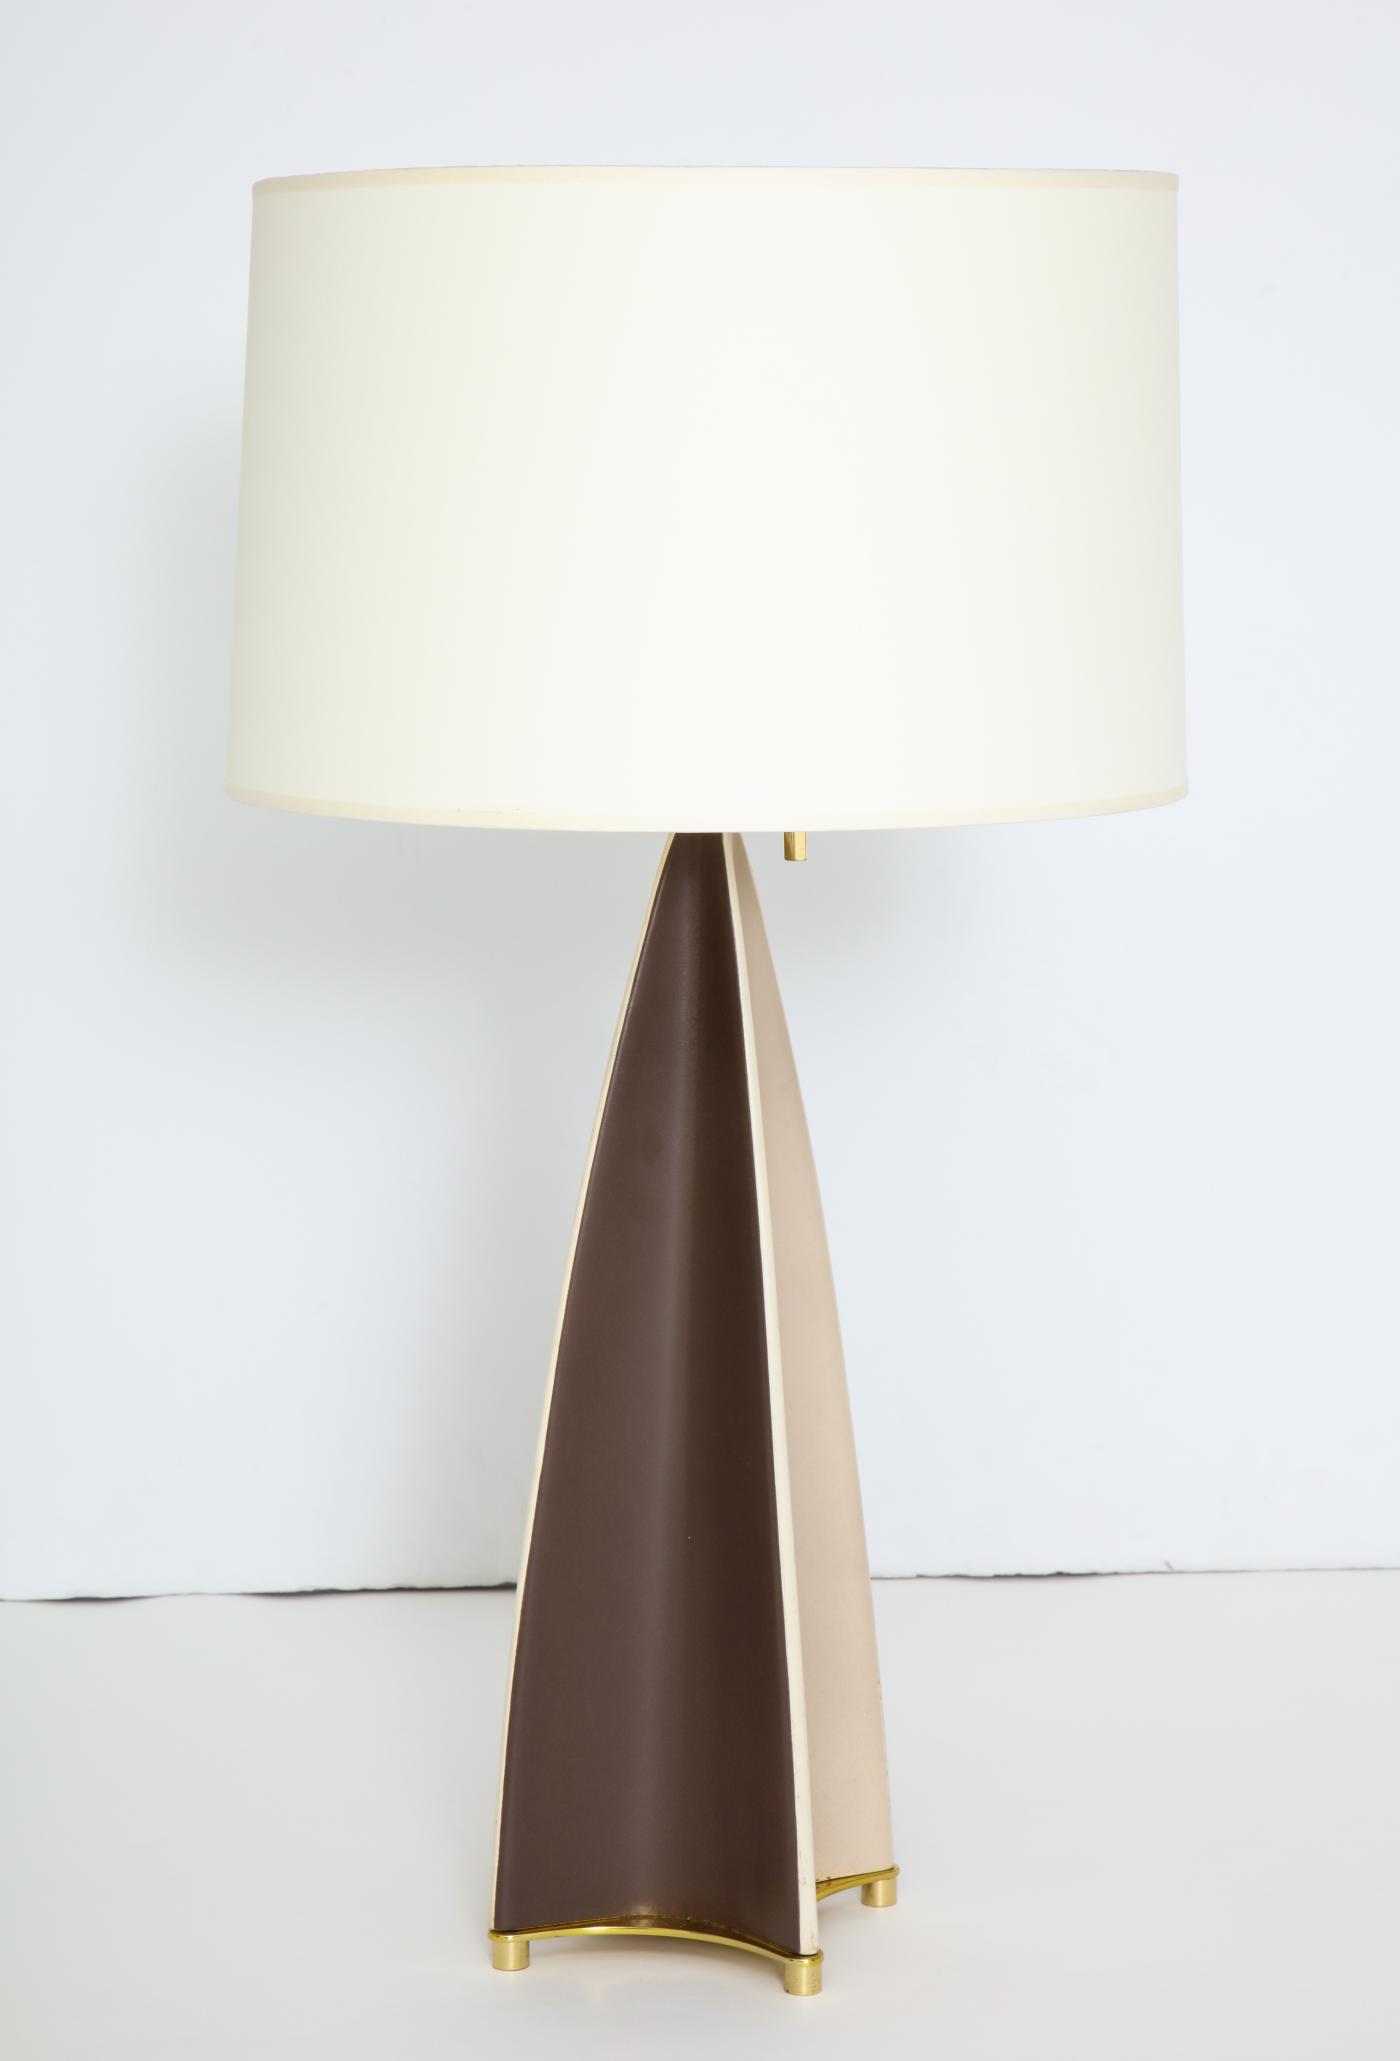 Parabolic Fin Table lamp by Gerald Thurston for Lightolier.